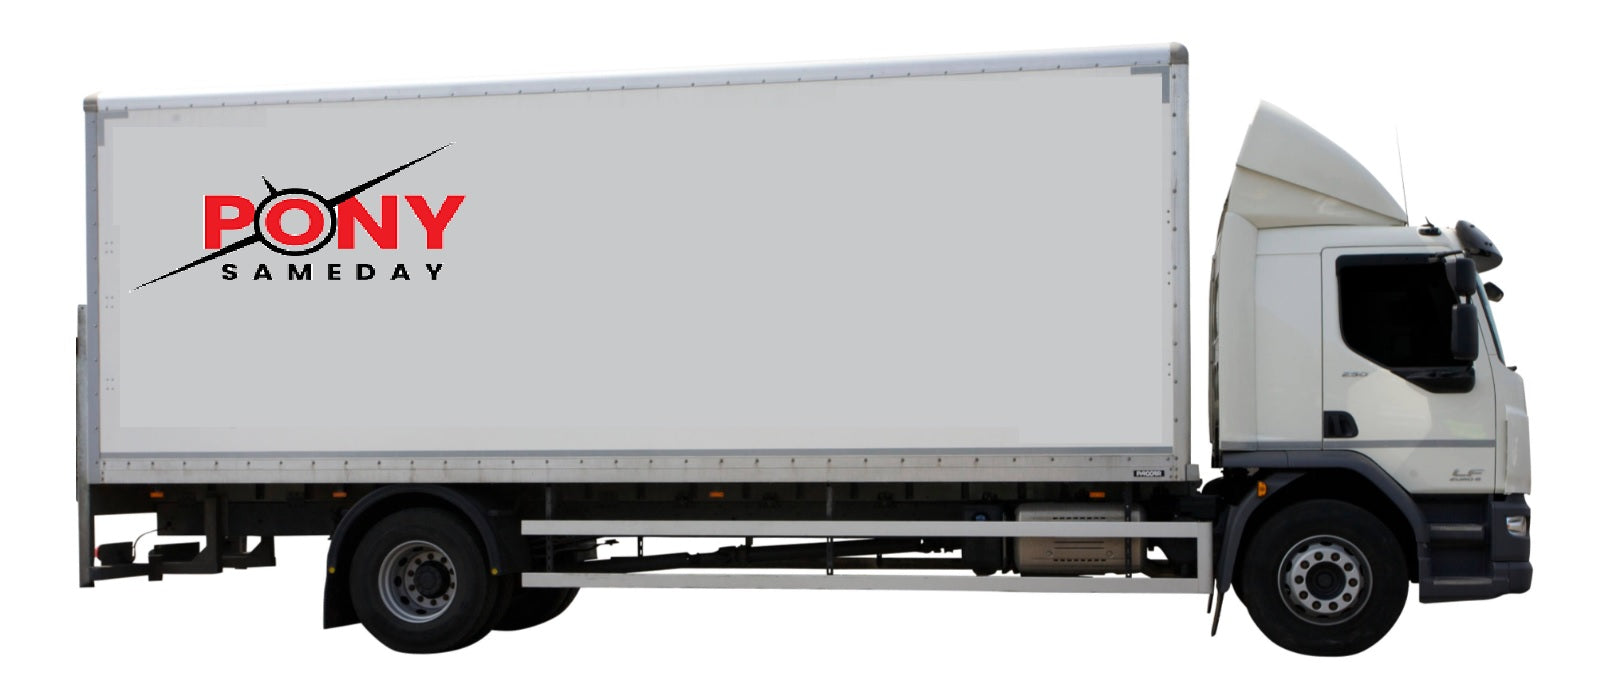 18 tonne truck for couriers - Pony Express